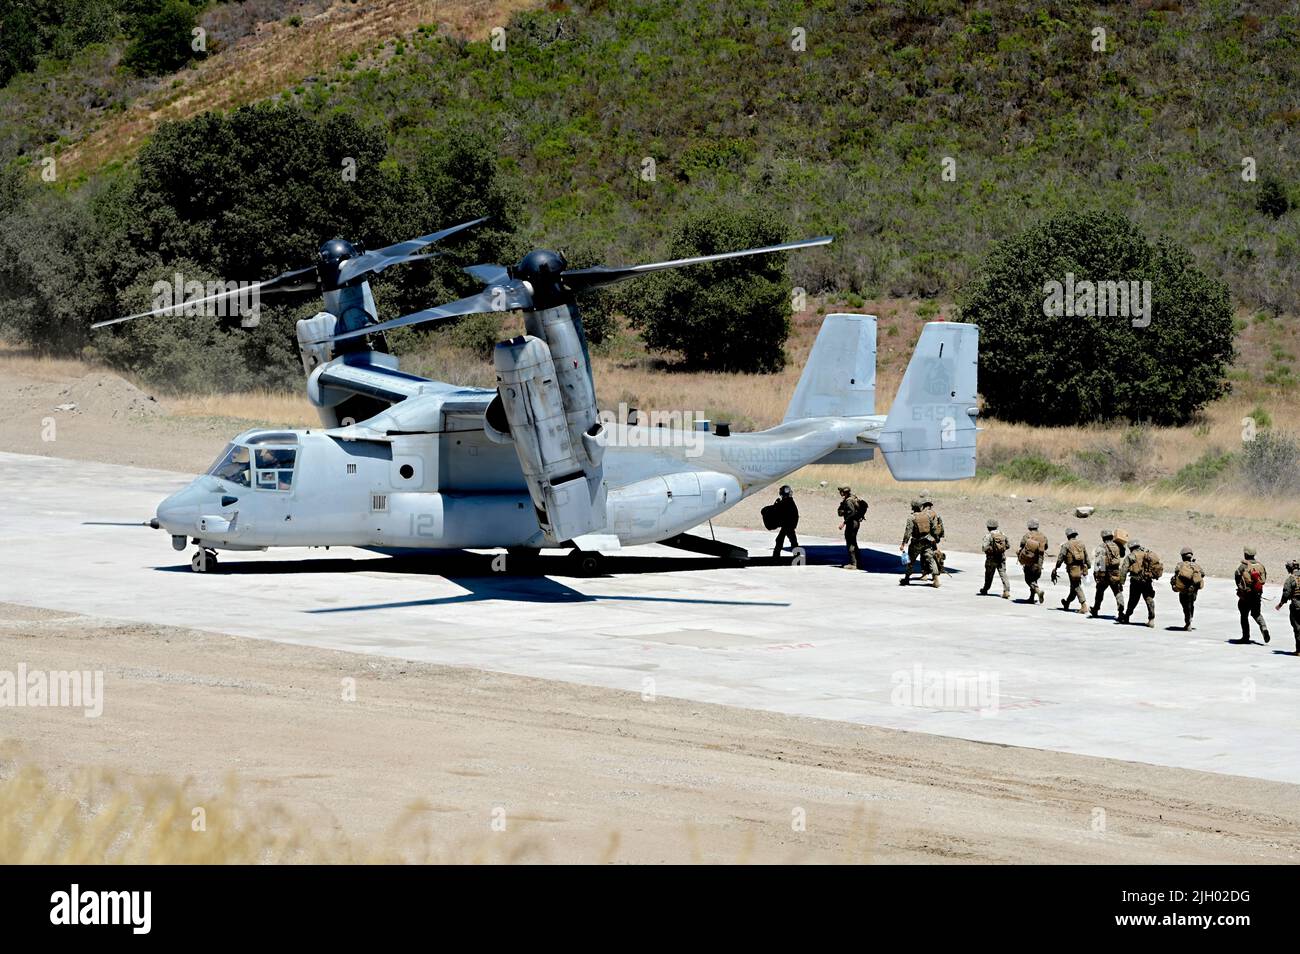 U.S. Marines board a MV-22 Osprey after it landed on a recently repaired runway during Operation Turning Point on Vandenberg Space Force Base, Calif., June 16,  2022. The Osprey quickly touched down, loaded personnel, and took off in  order to test the runway for viability following repairs to it. (U.S. Space  Force photo by Airman 1st Class Rocio Romo) Stock Photo